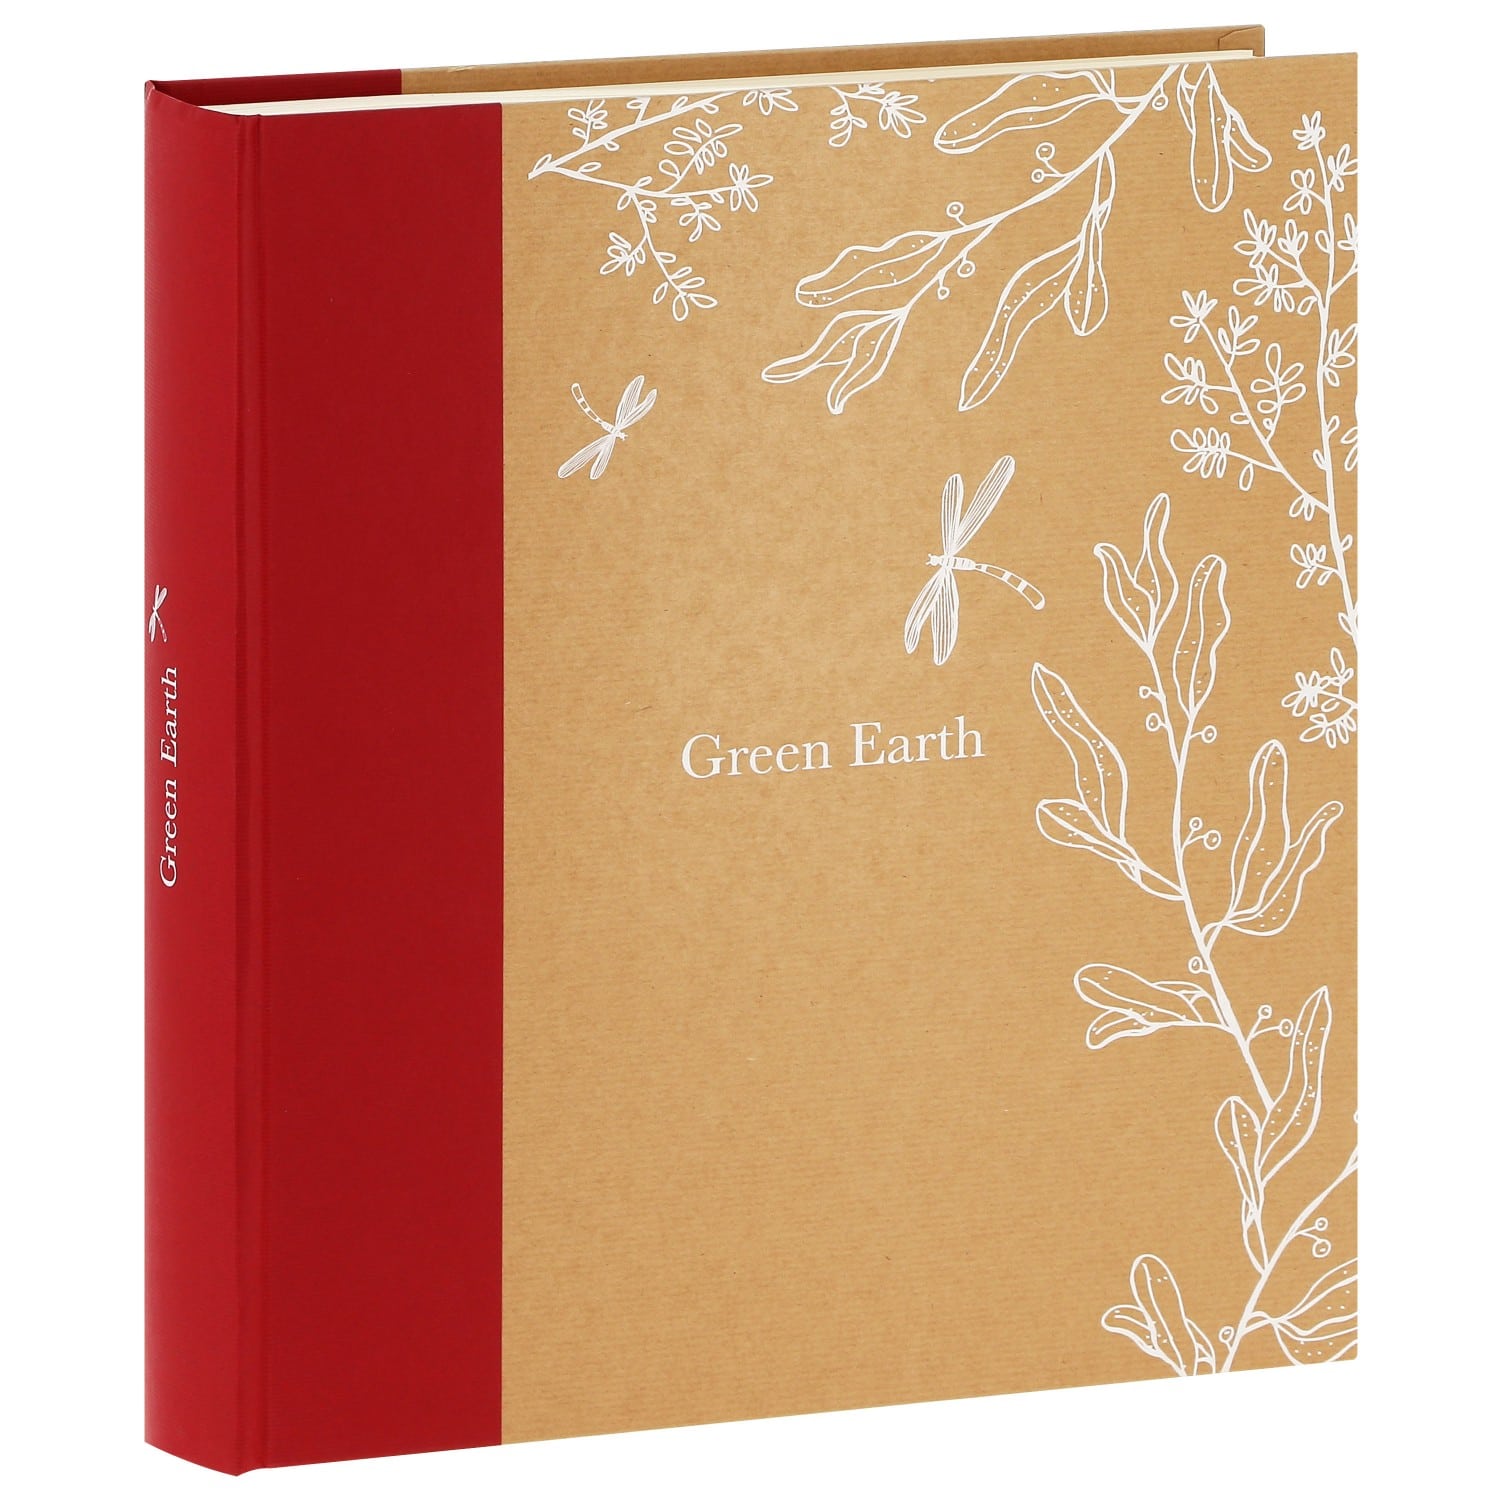 Album photo traditionnel Greenearth rouge 400 photos 10x15 Panodia 100 pages